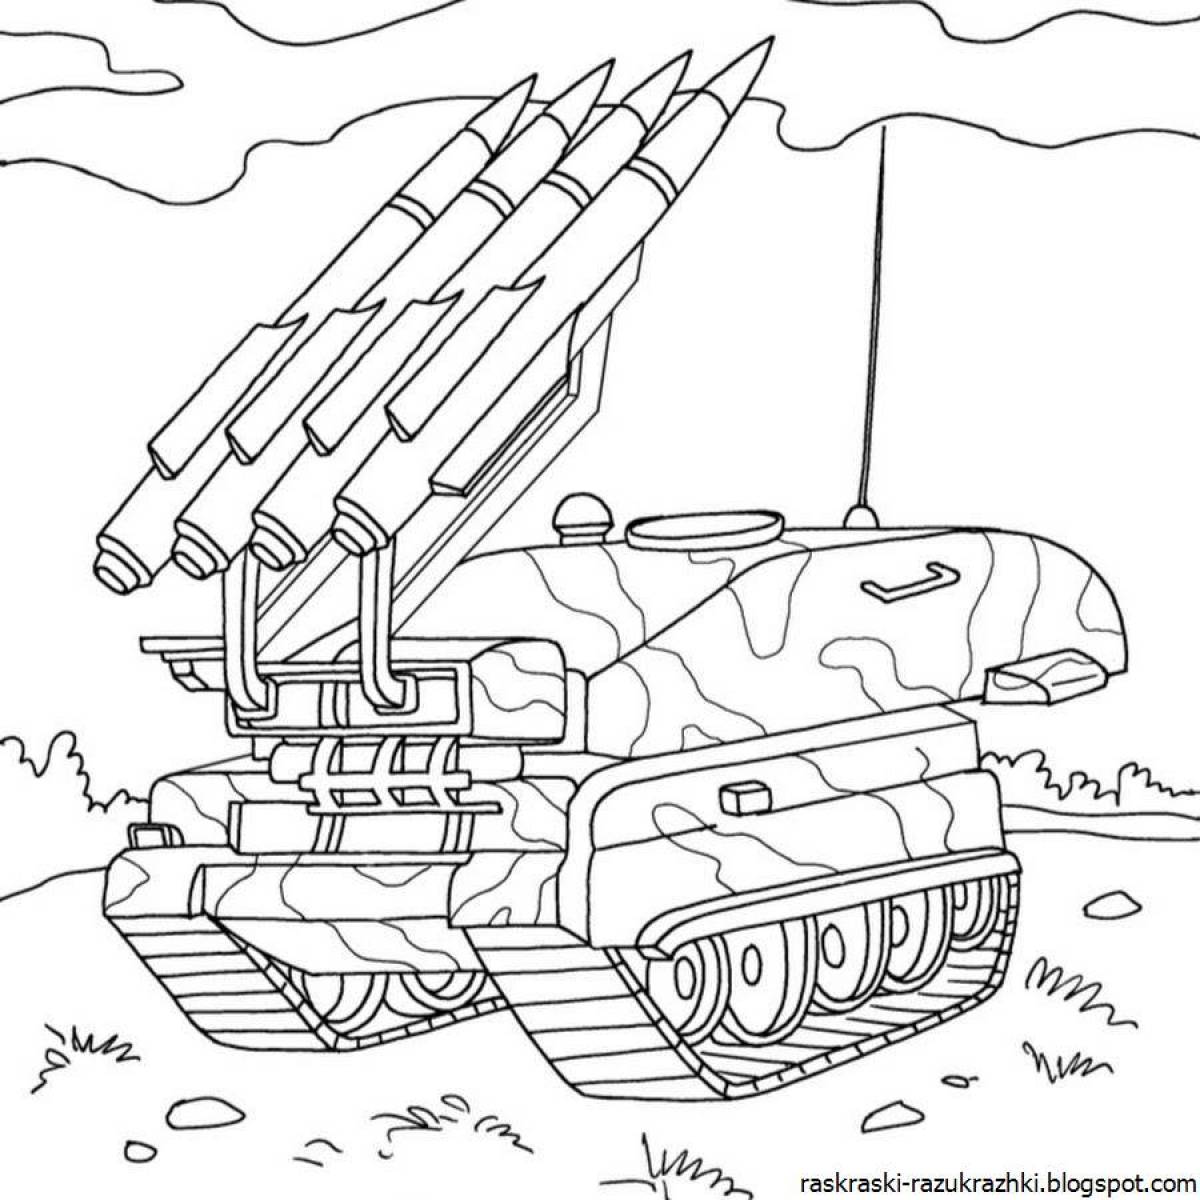 Fun military vehicle coloring book for kids